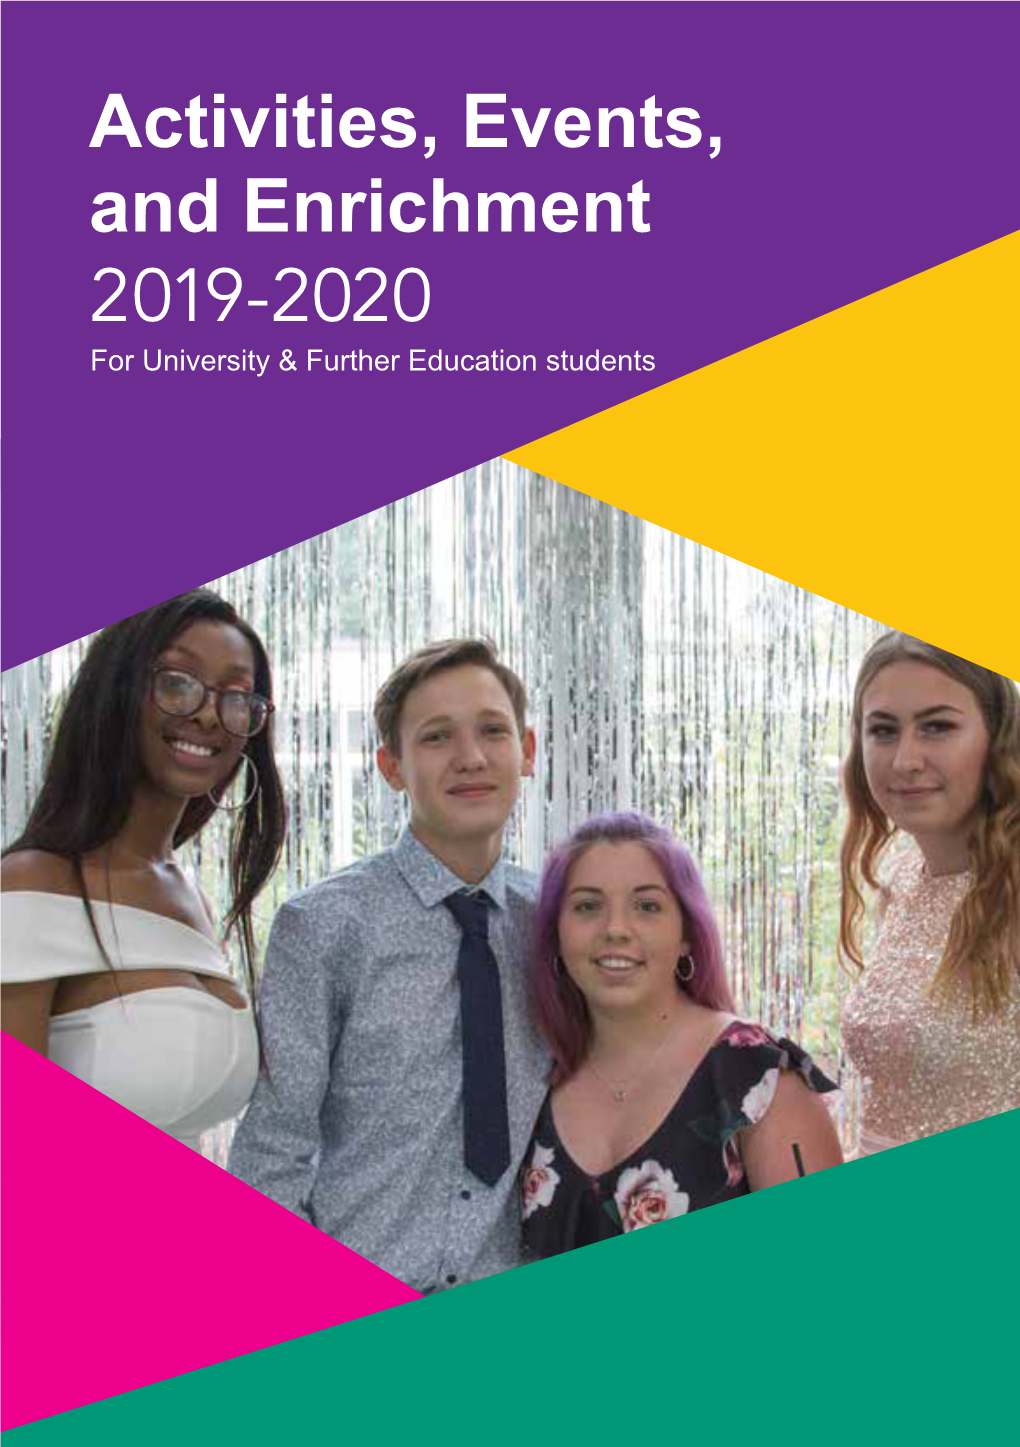 Activities, Events, and Enrichment 2019-2020 for University & Further Education Students Contents